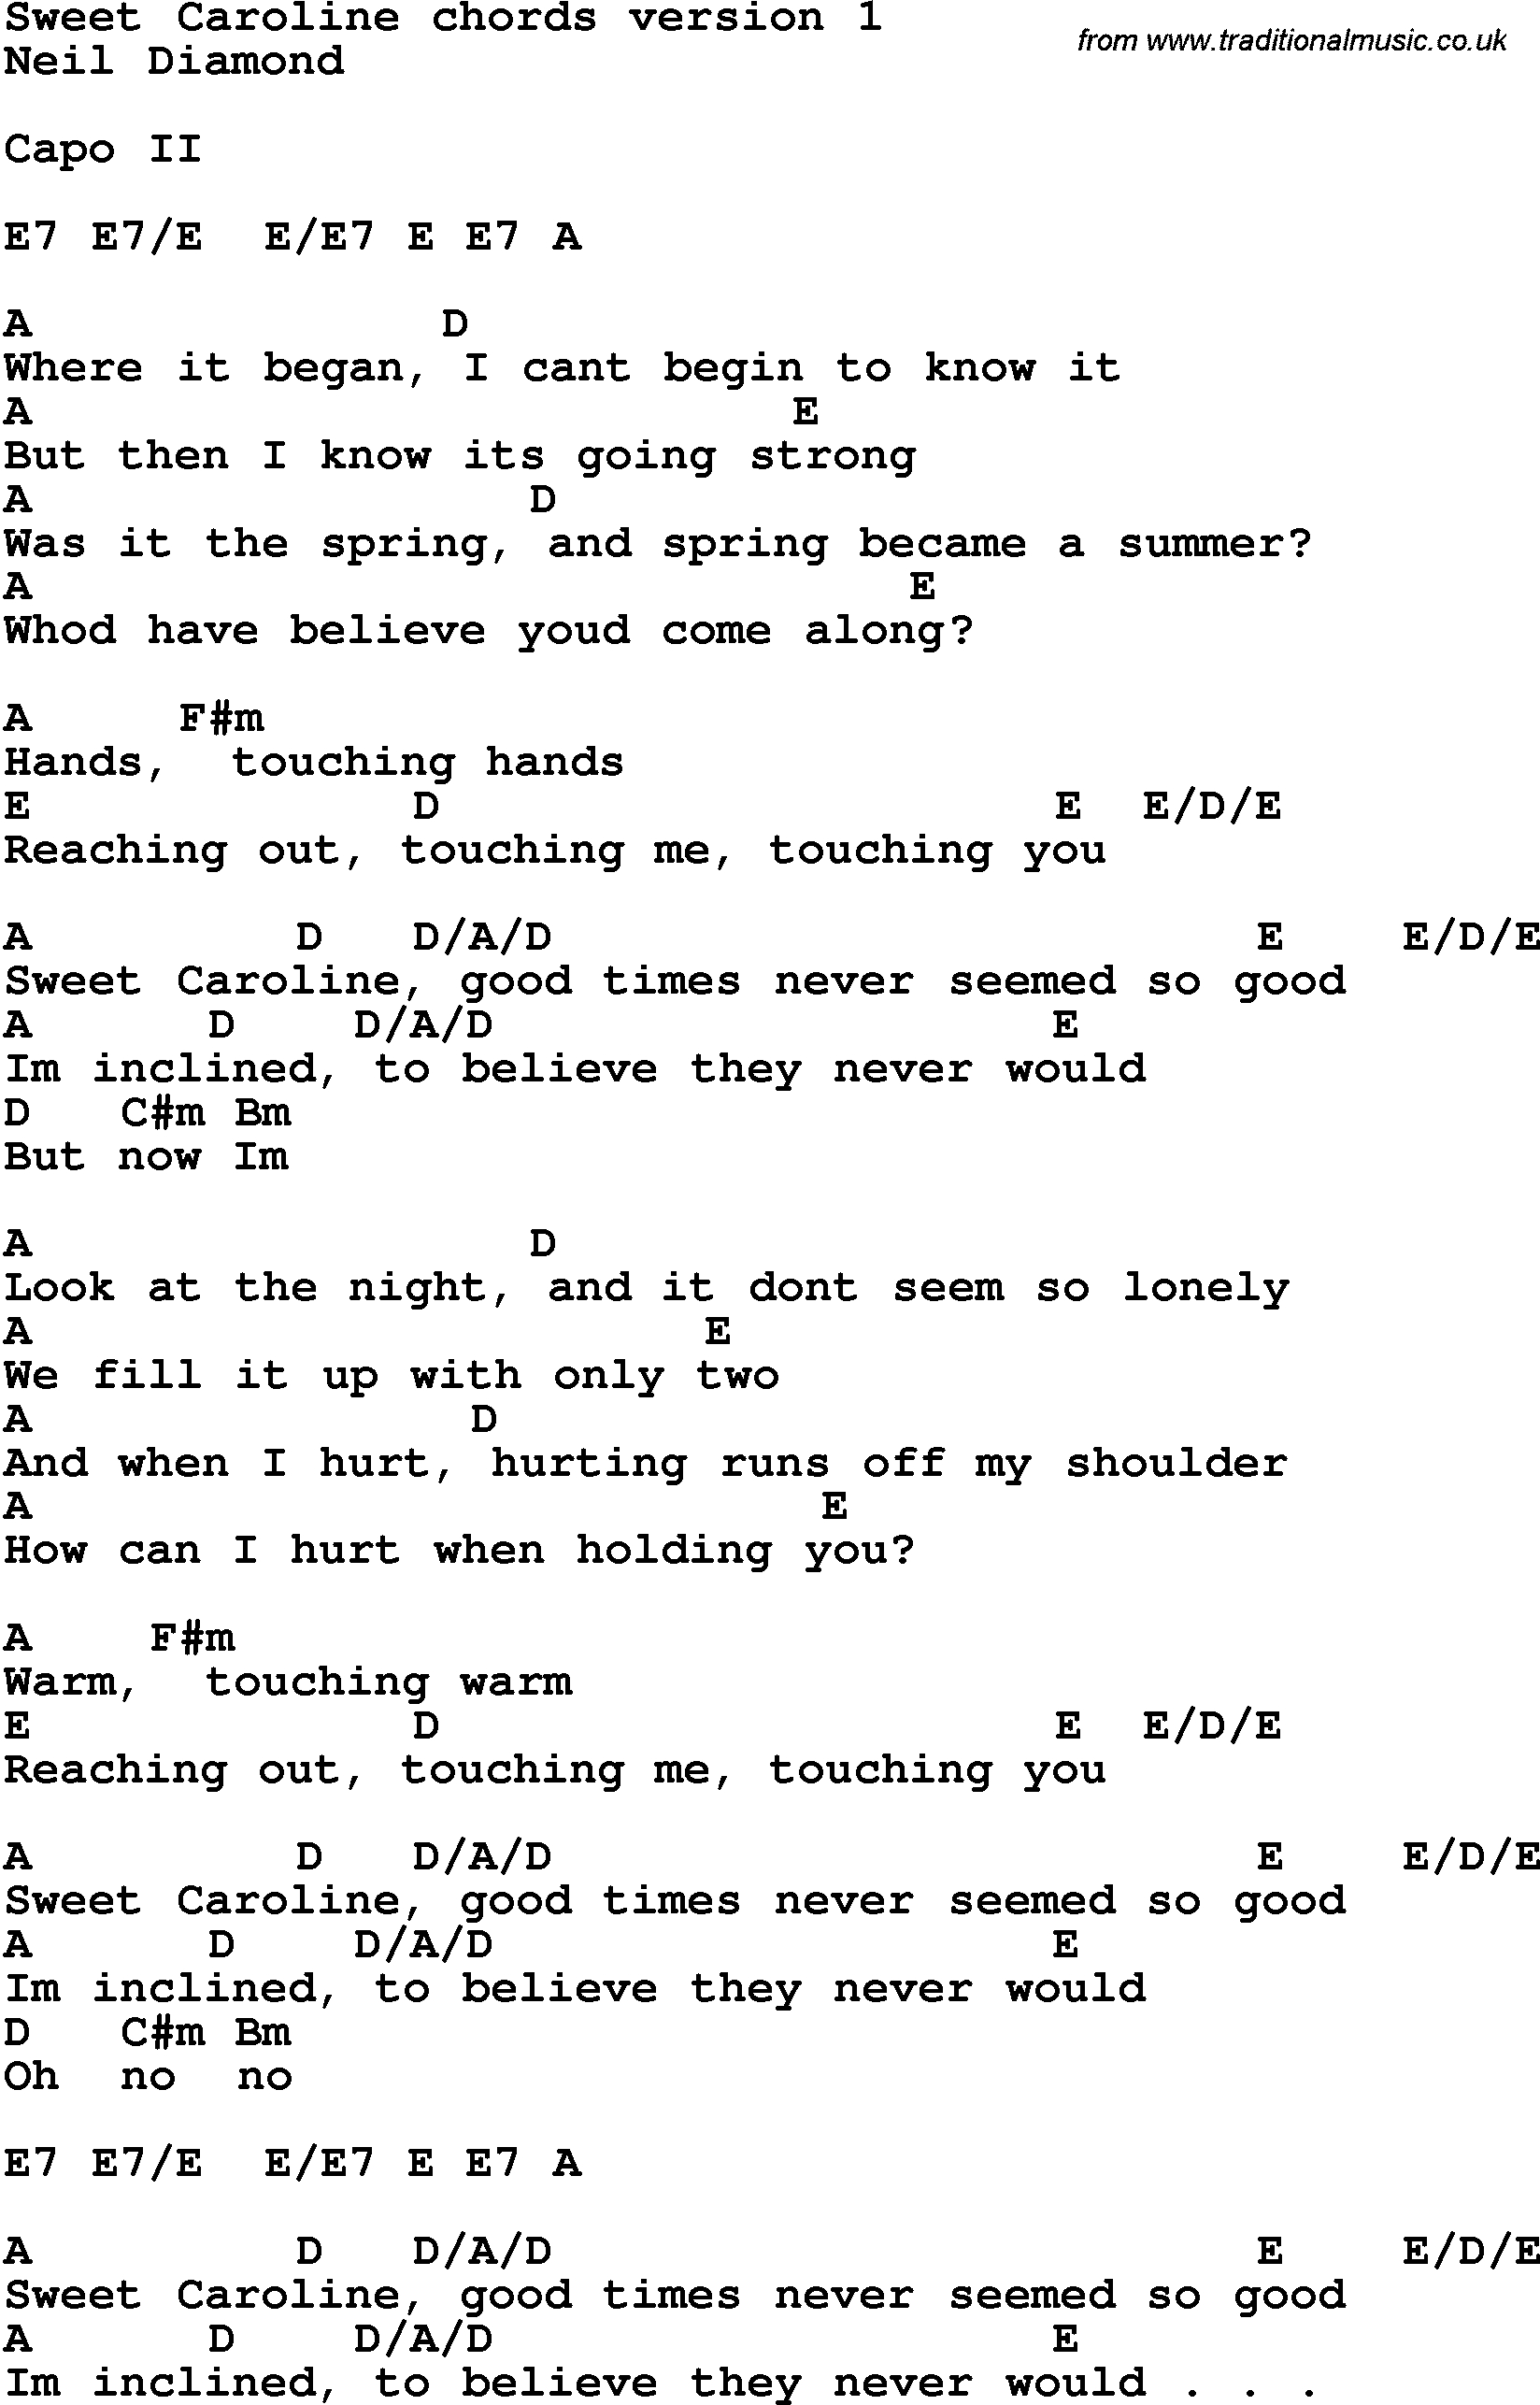 Song Lyrics With Guitar Chords For Sweet Caroline - Free Printable Song Lyrics With Guitar Chords